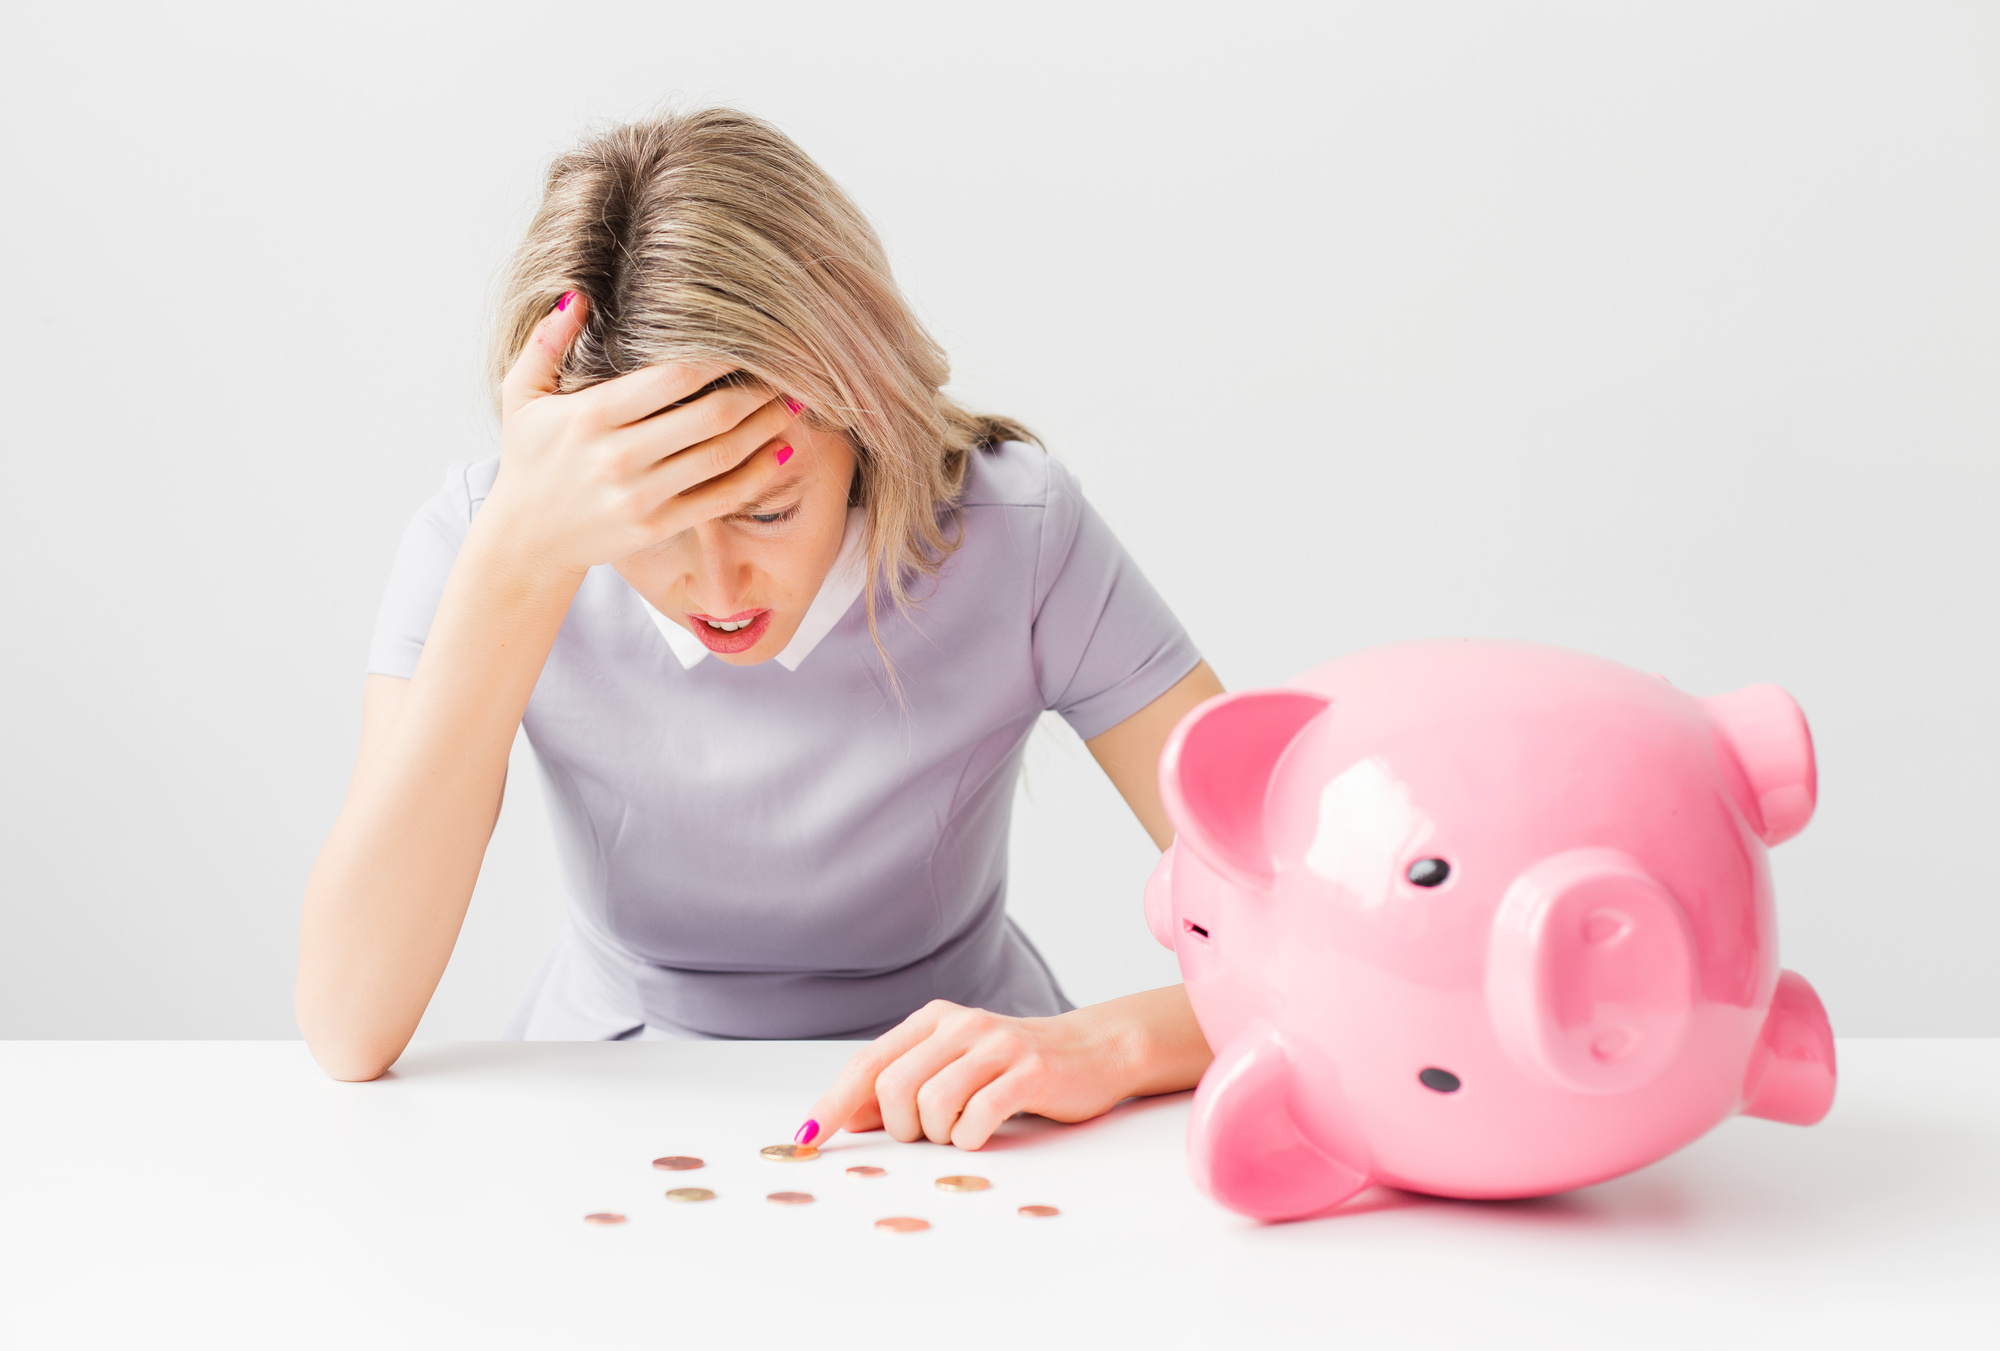 7 Ways to Solve Financial Problems That You Should Try